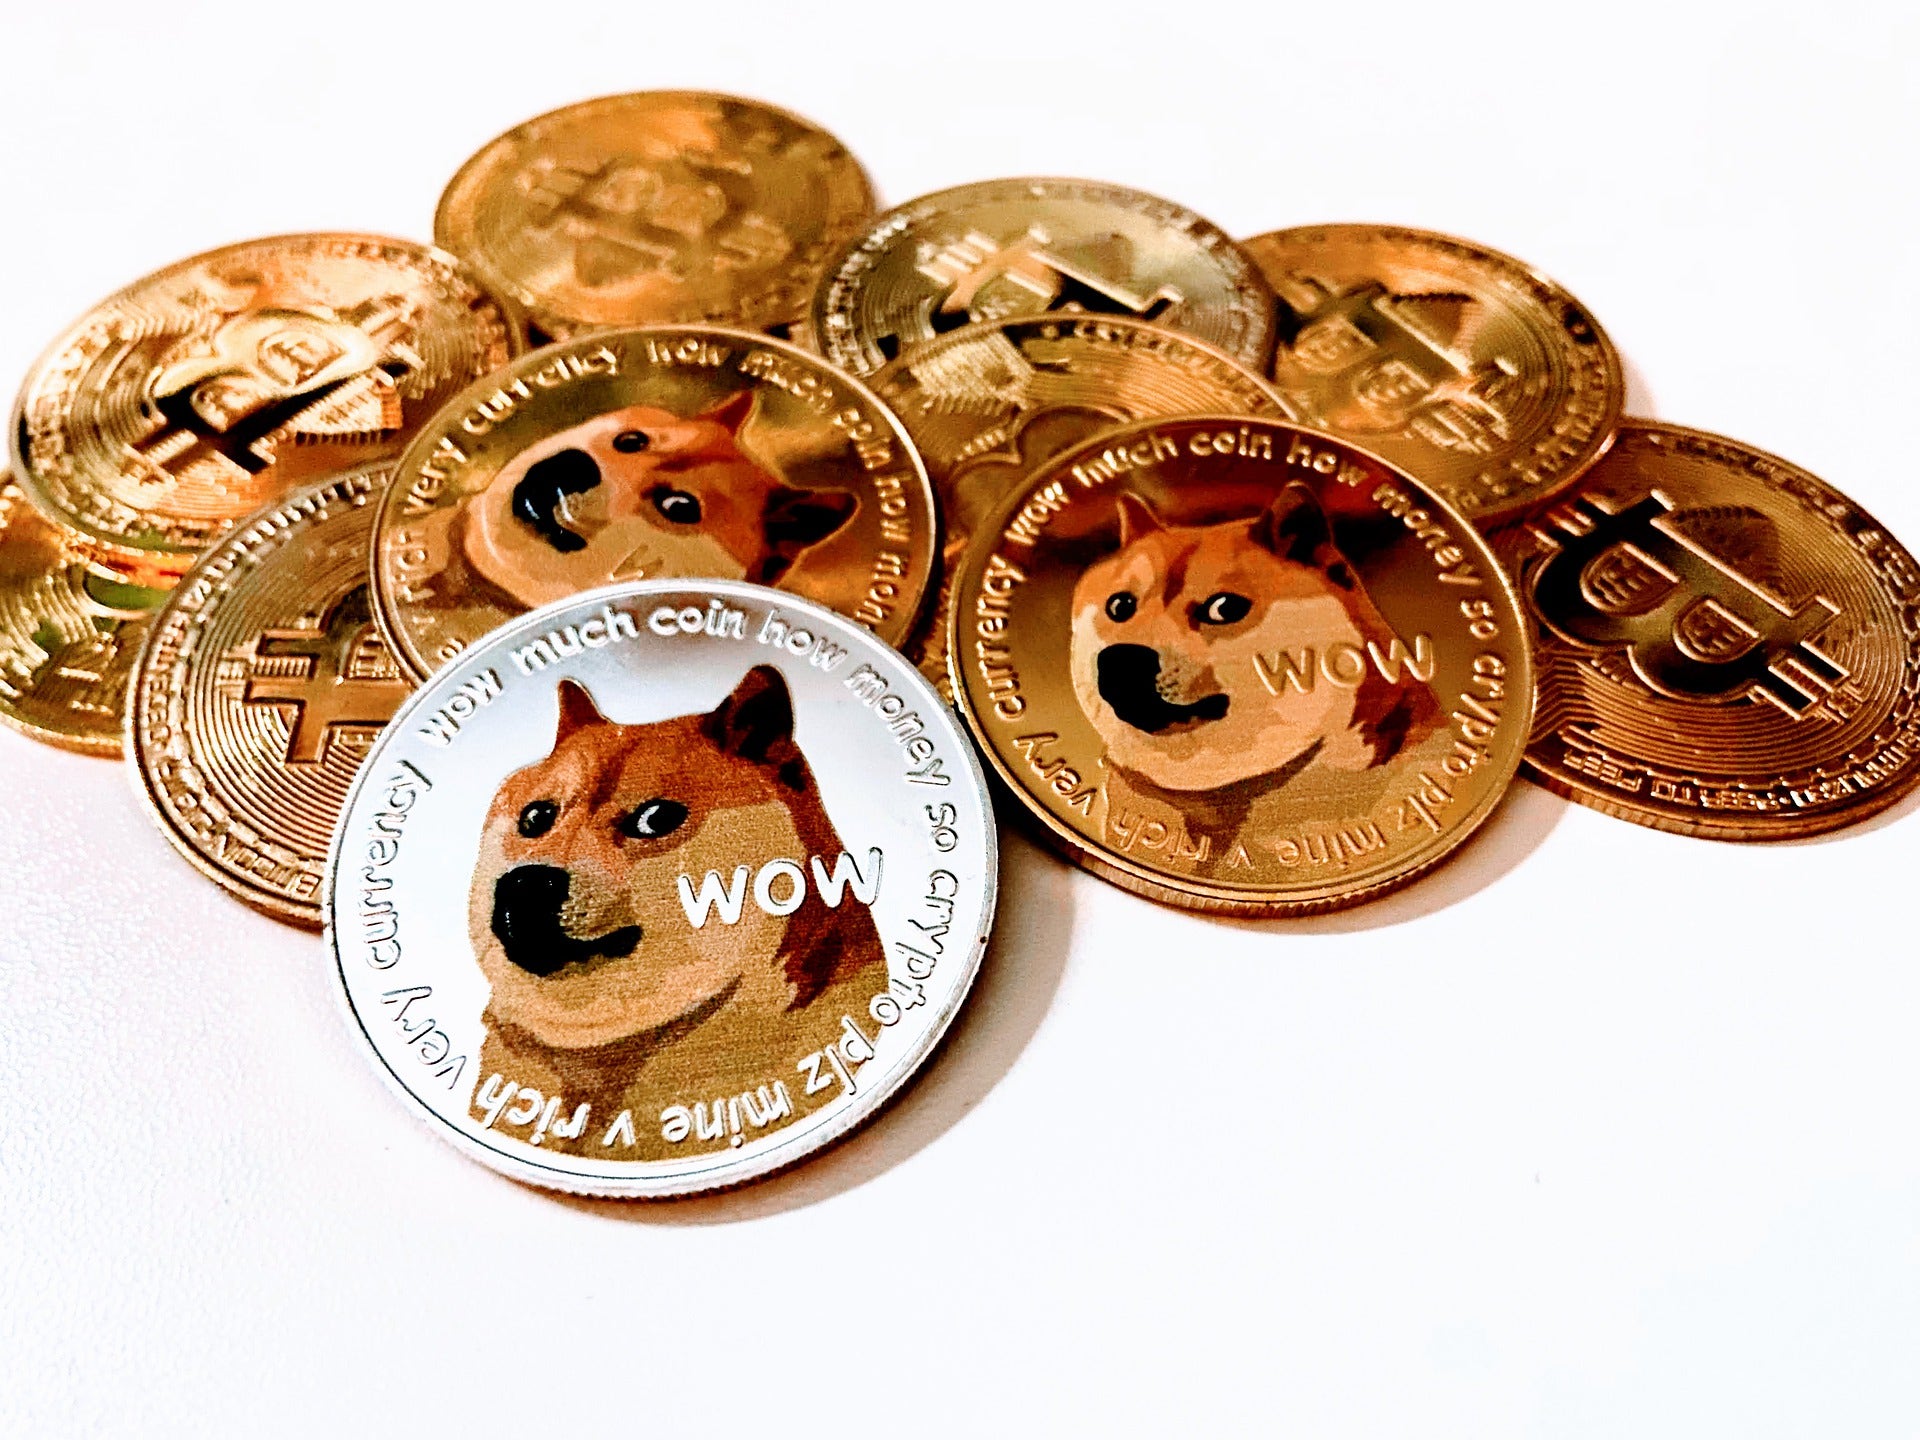 Dogecoin Mascot Kabosu Cheats Death, Bounces Back; Experts Share Investment Strategies For Meme Coin